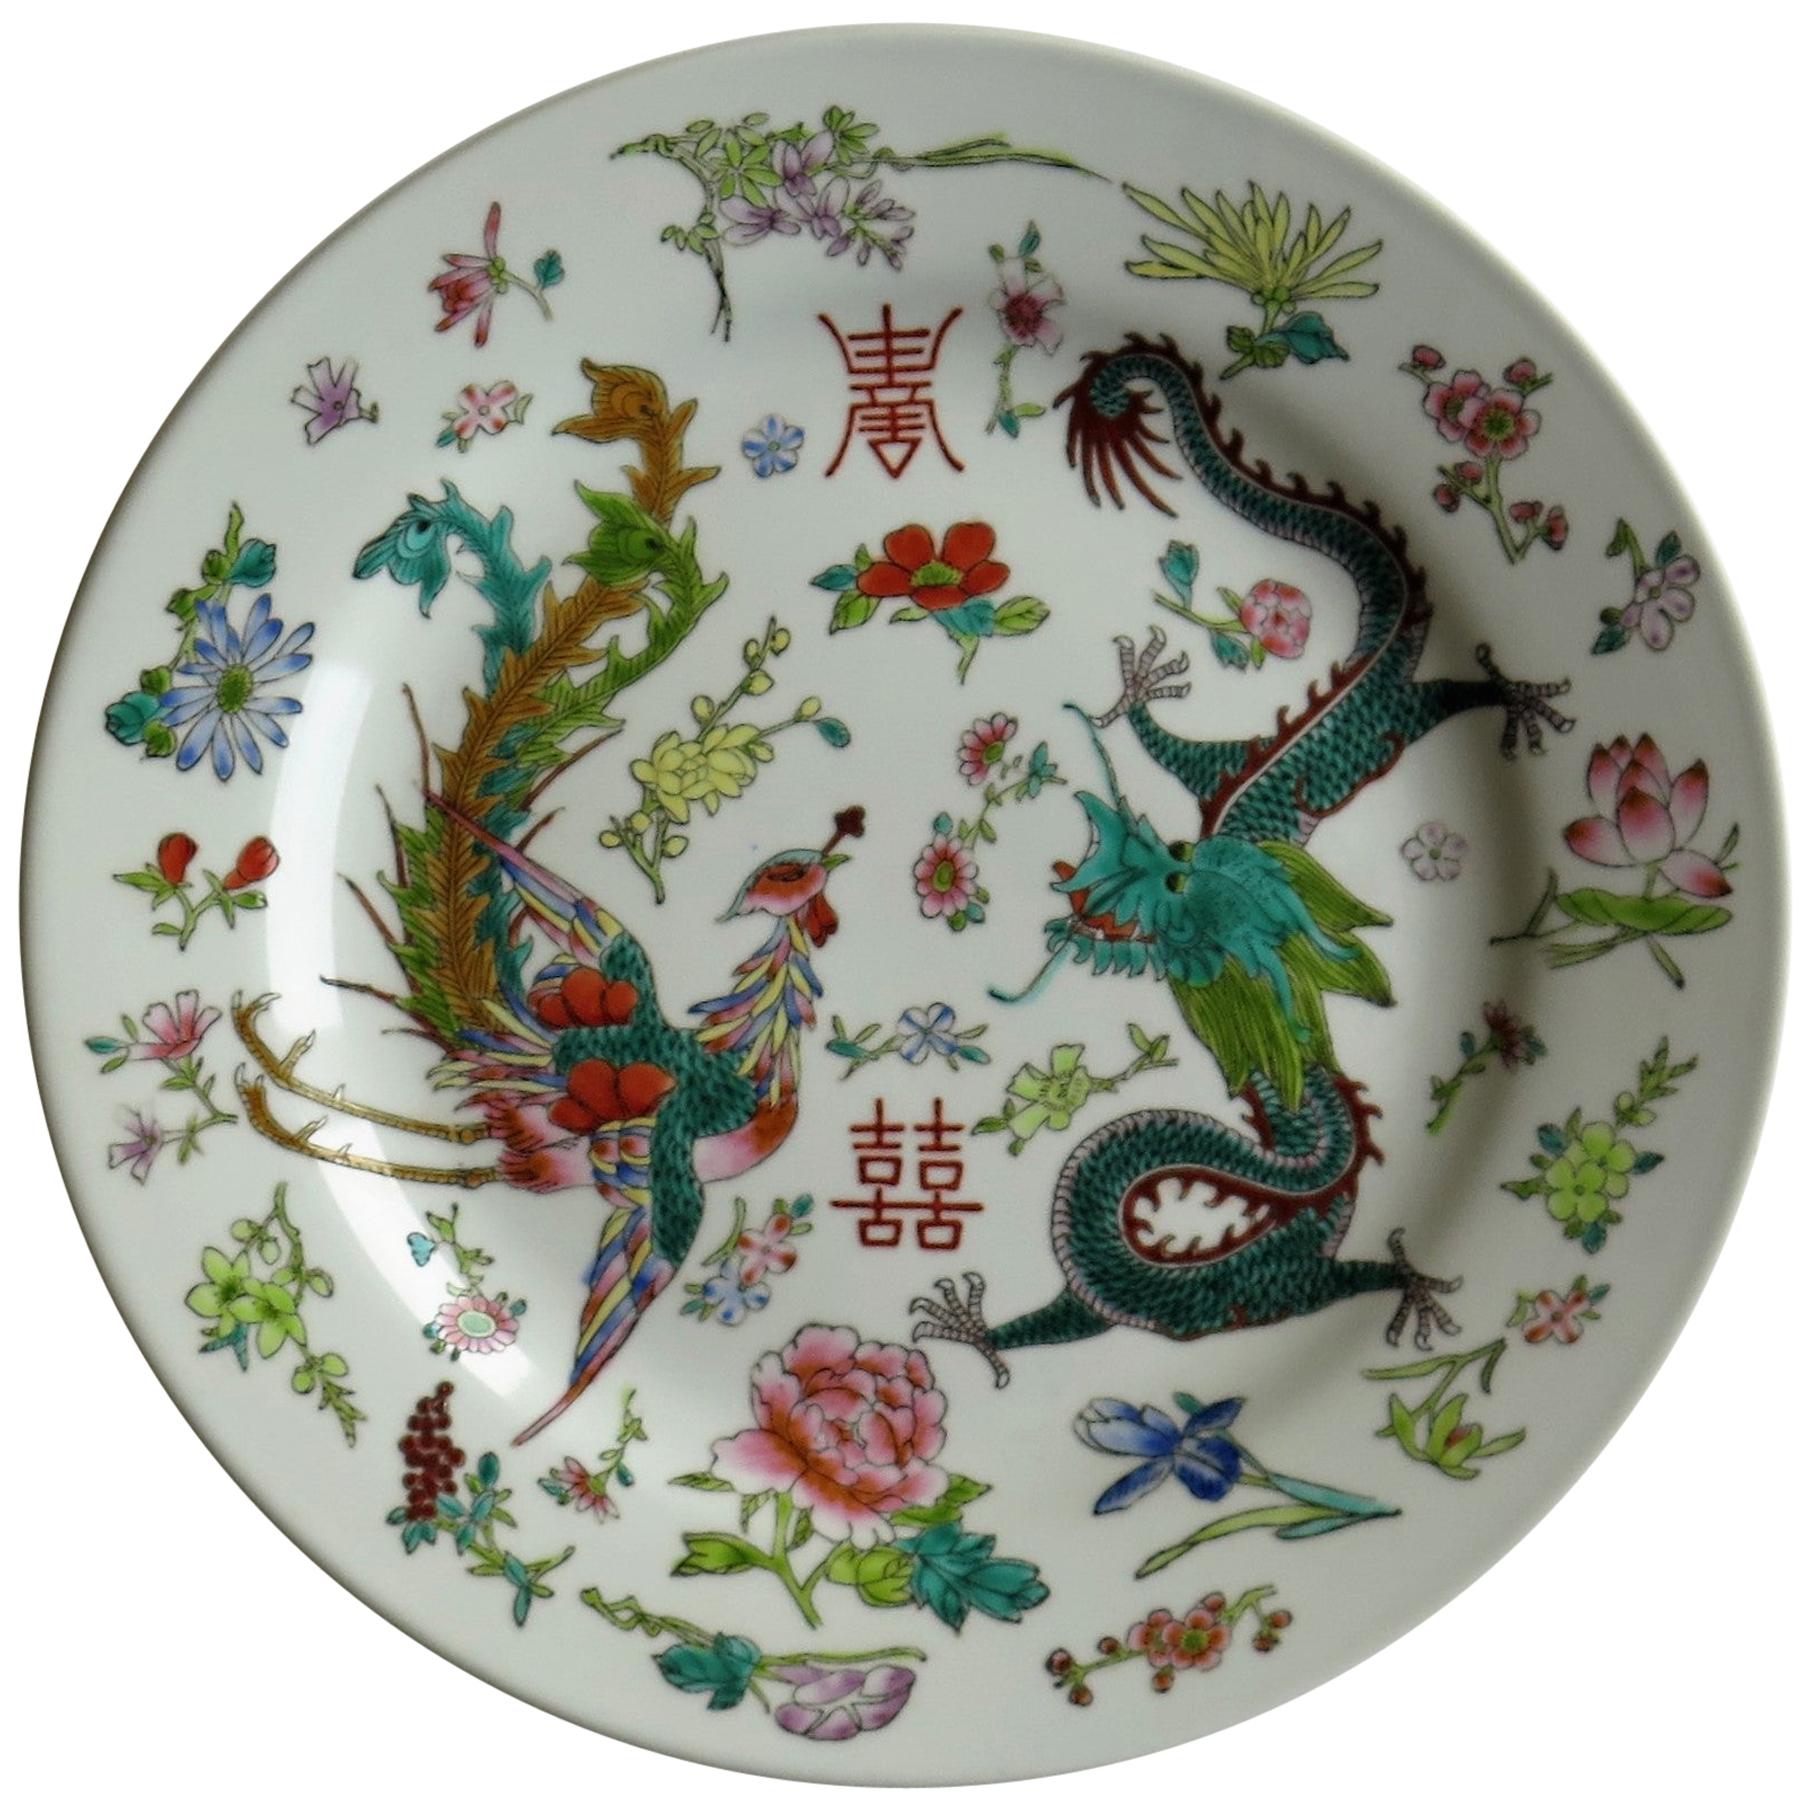 9"Chinese Rose Porcelain painted Dragon and phoenix Plate 